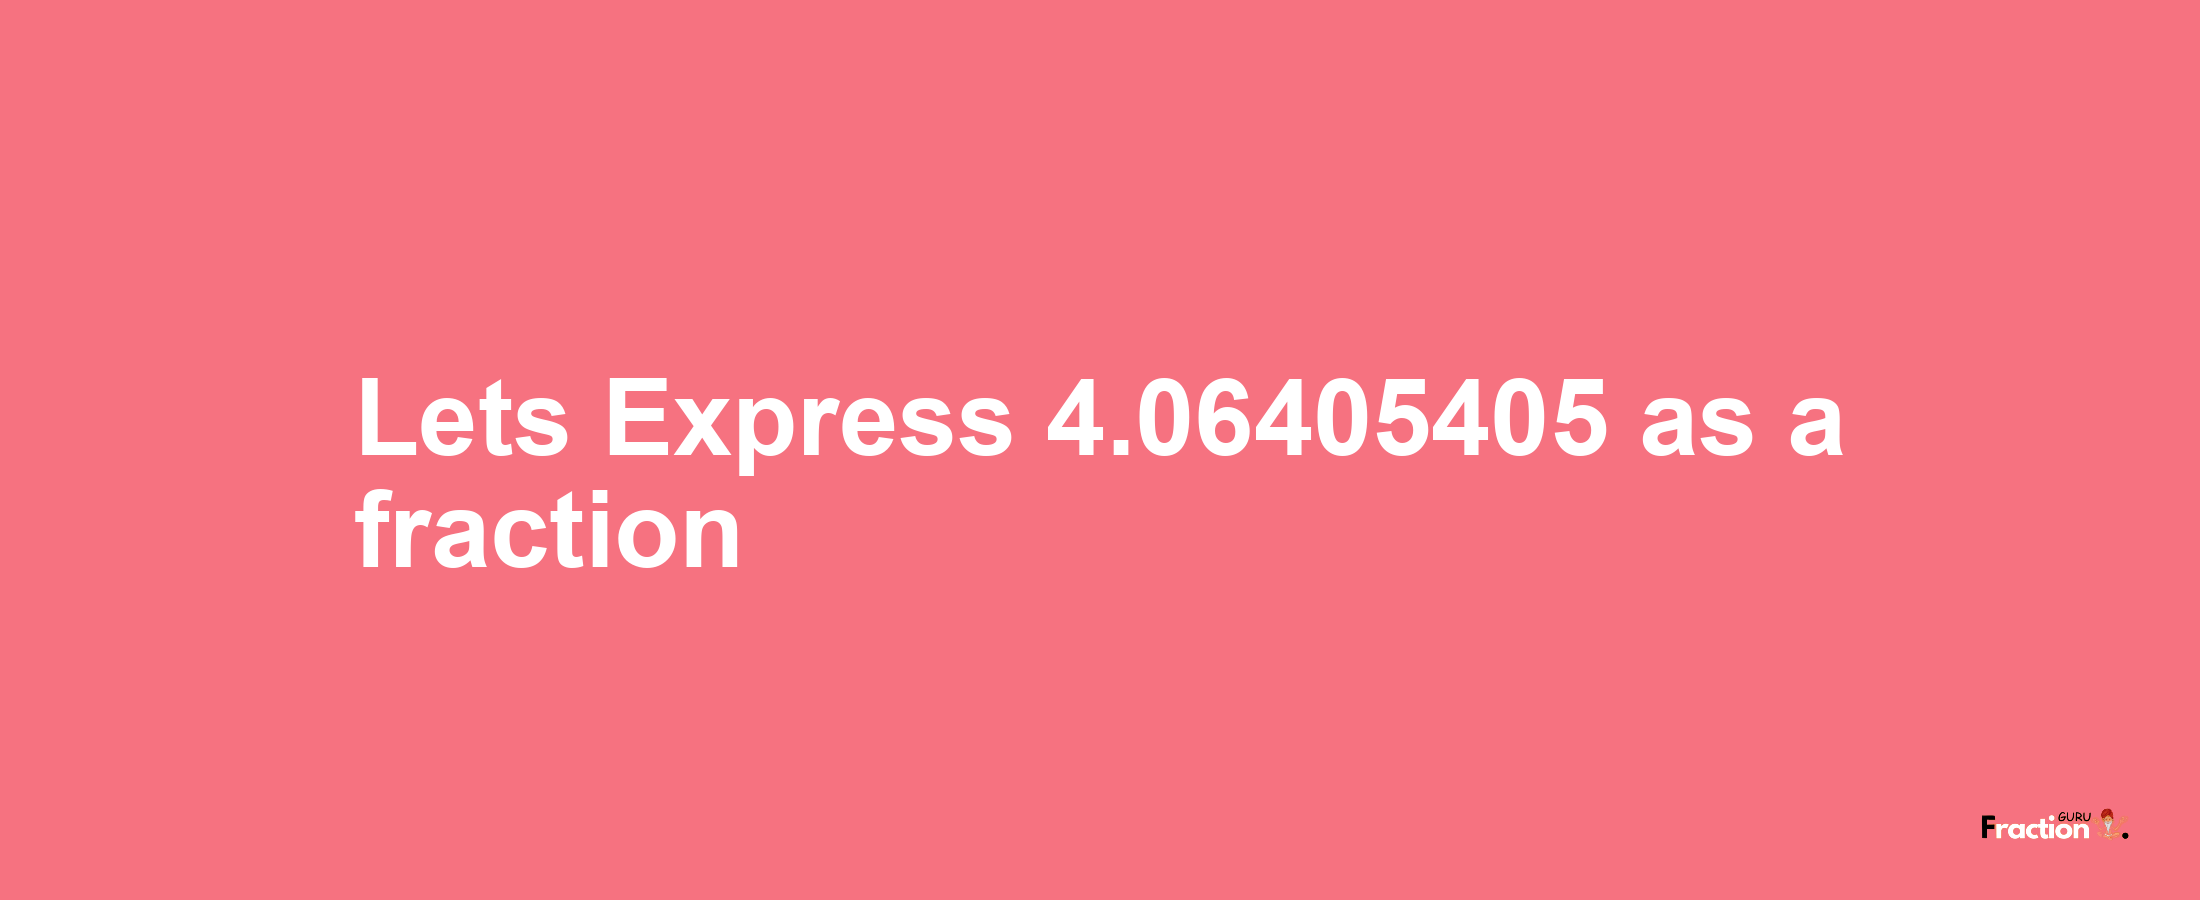 Lets Express 4.06405405 as afraction